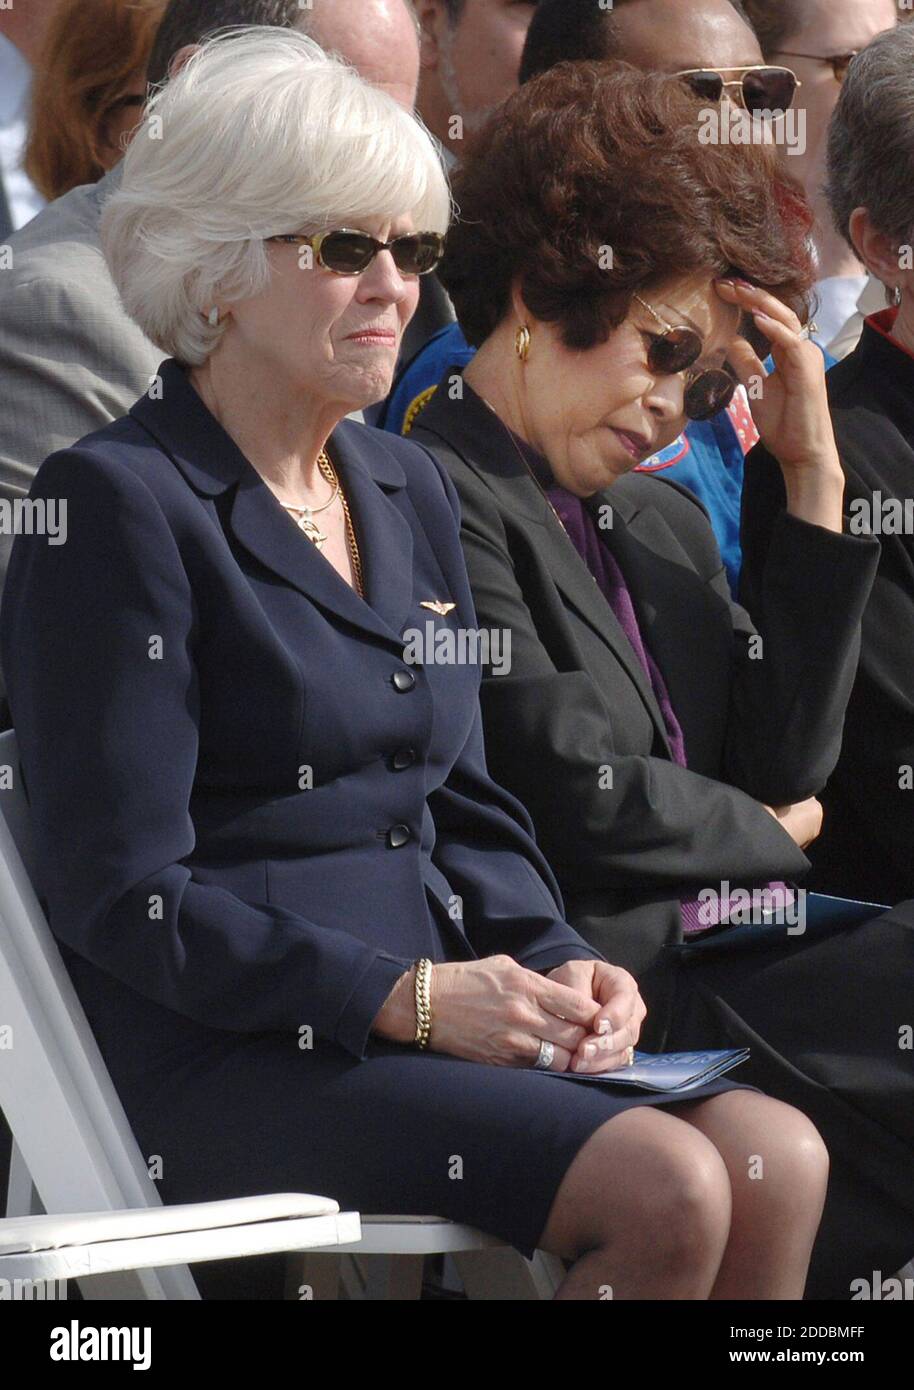 NO FILM, NO VIDEO, NO TV, NO DOCUMENTARY - Jane Smith Wolcott, left, widow of late pilot Michael Smith and Lona Onizuka, right, widow of late mission specialist Ellison Onizuka, are shown Saturday, January 28, 2006, during a public ceremony at the Kennedy Space Center, Florida, to honor the crew of Challenger STS 51L and all astronauts who have sacrificed their lives on the 20th anniversary of the Challenger accident. Photo by Red Huber/Orlando Sentinel/KRT/ABACAPRESS.COM Stock Photo